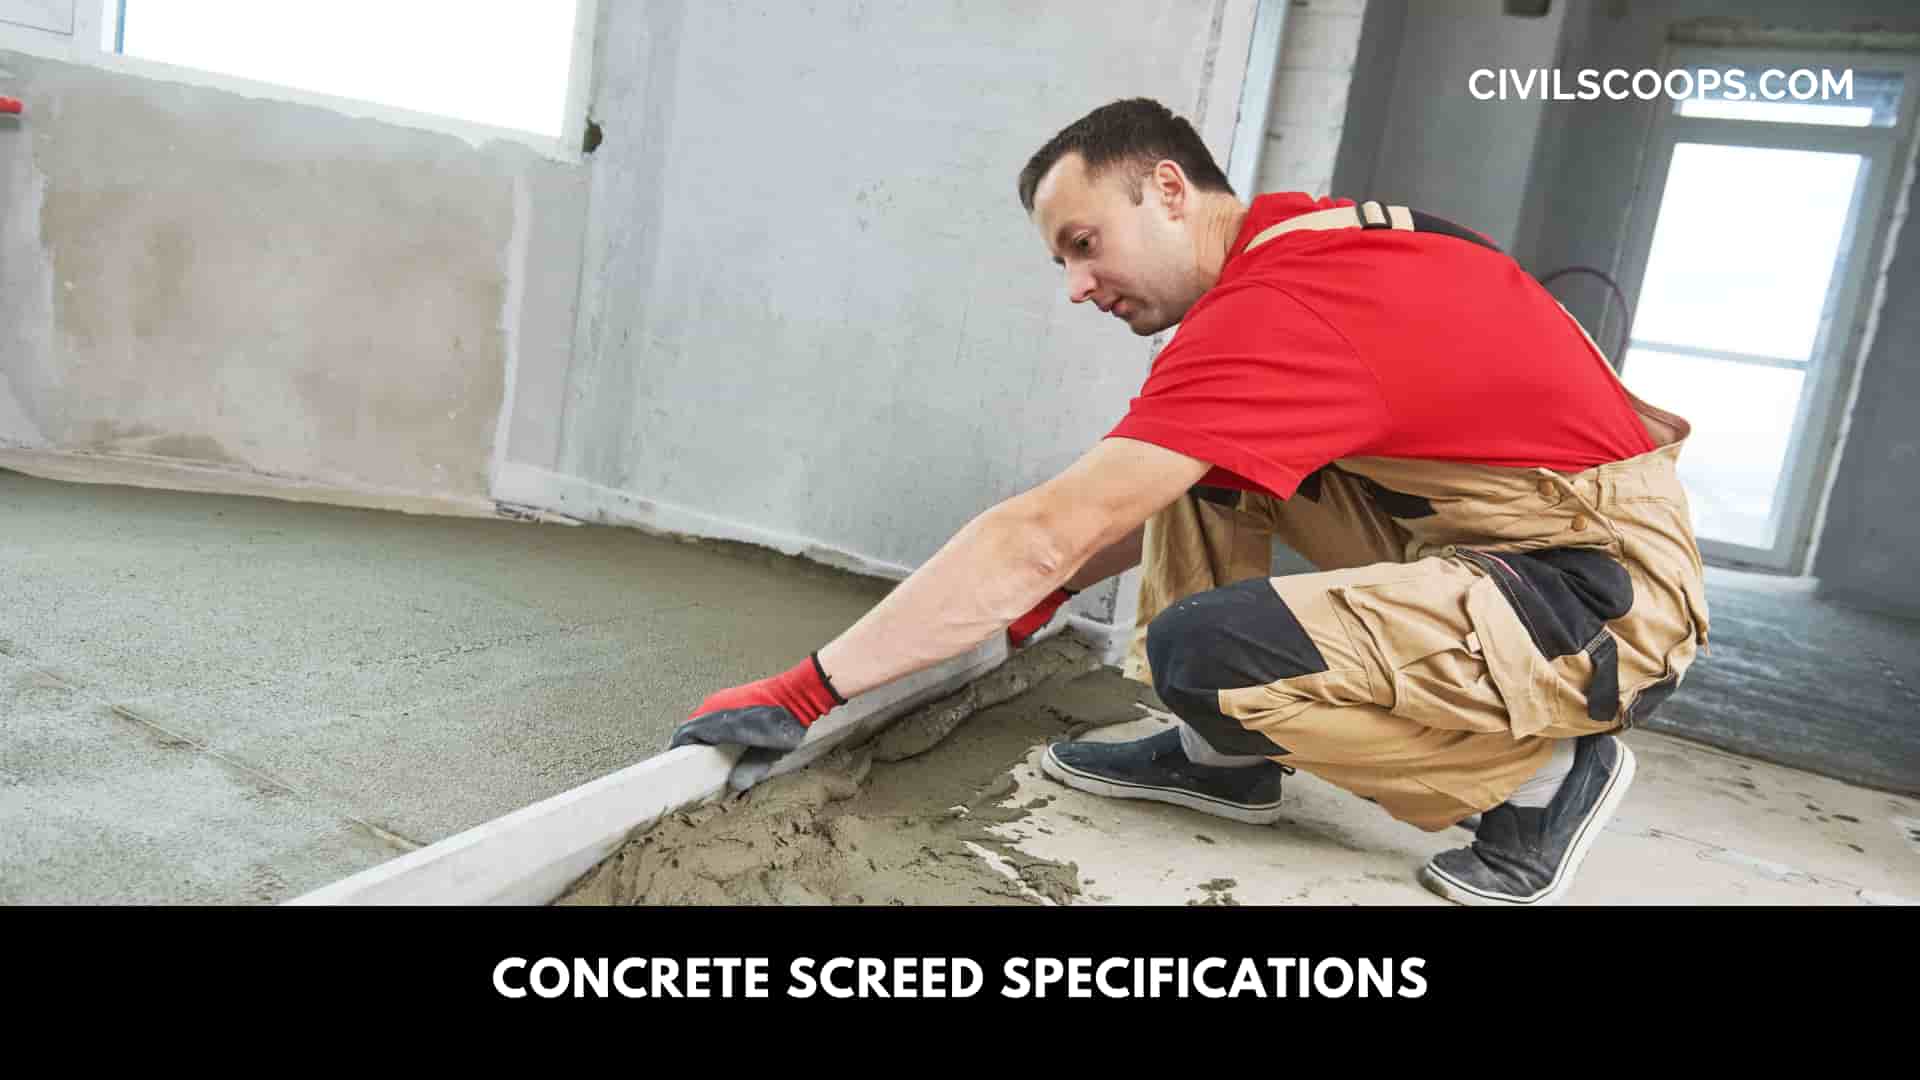 Concrete Screed Specifications